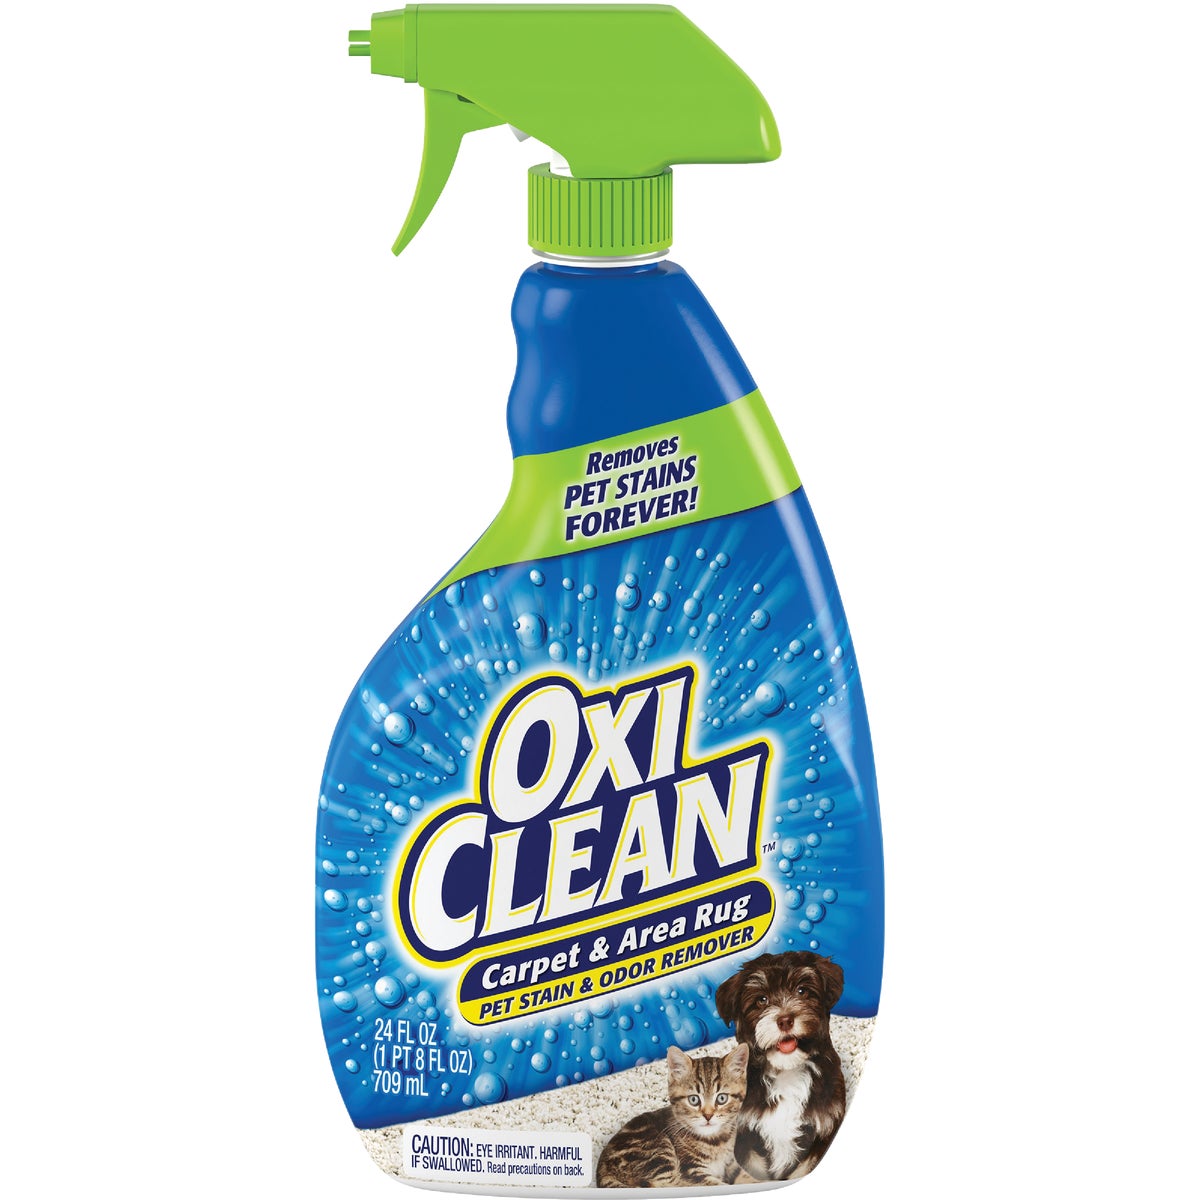 OxiClean 24 Oz. Carpet & Area Rug Pet Stain and Odor Remover